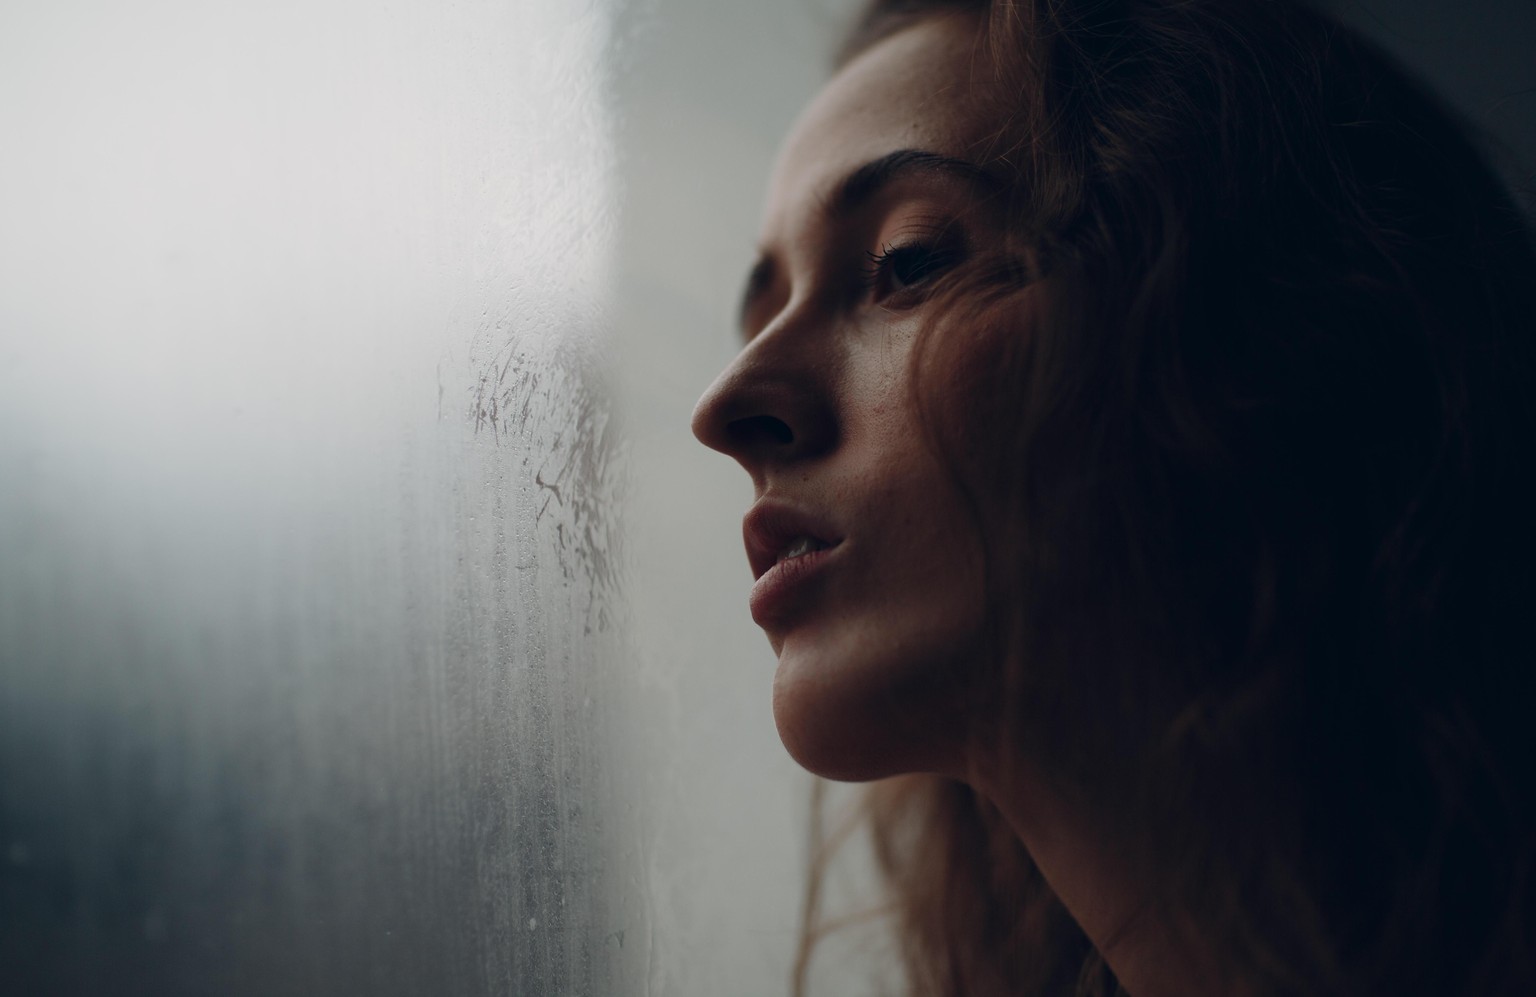 Portrait of young beautiful woman in profile near misted window || Modellfreigabe vorhanden